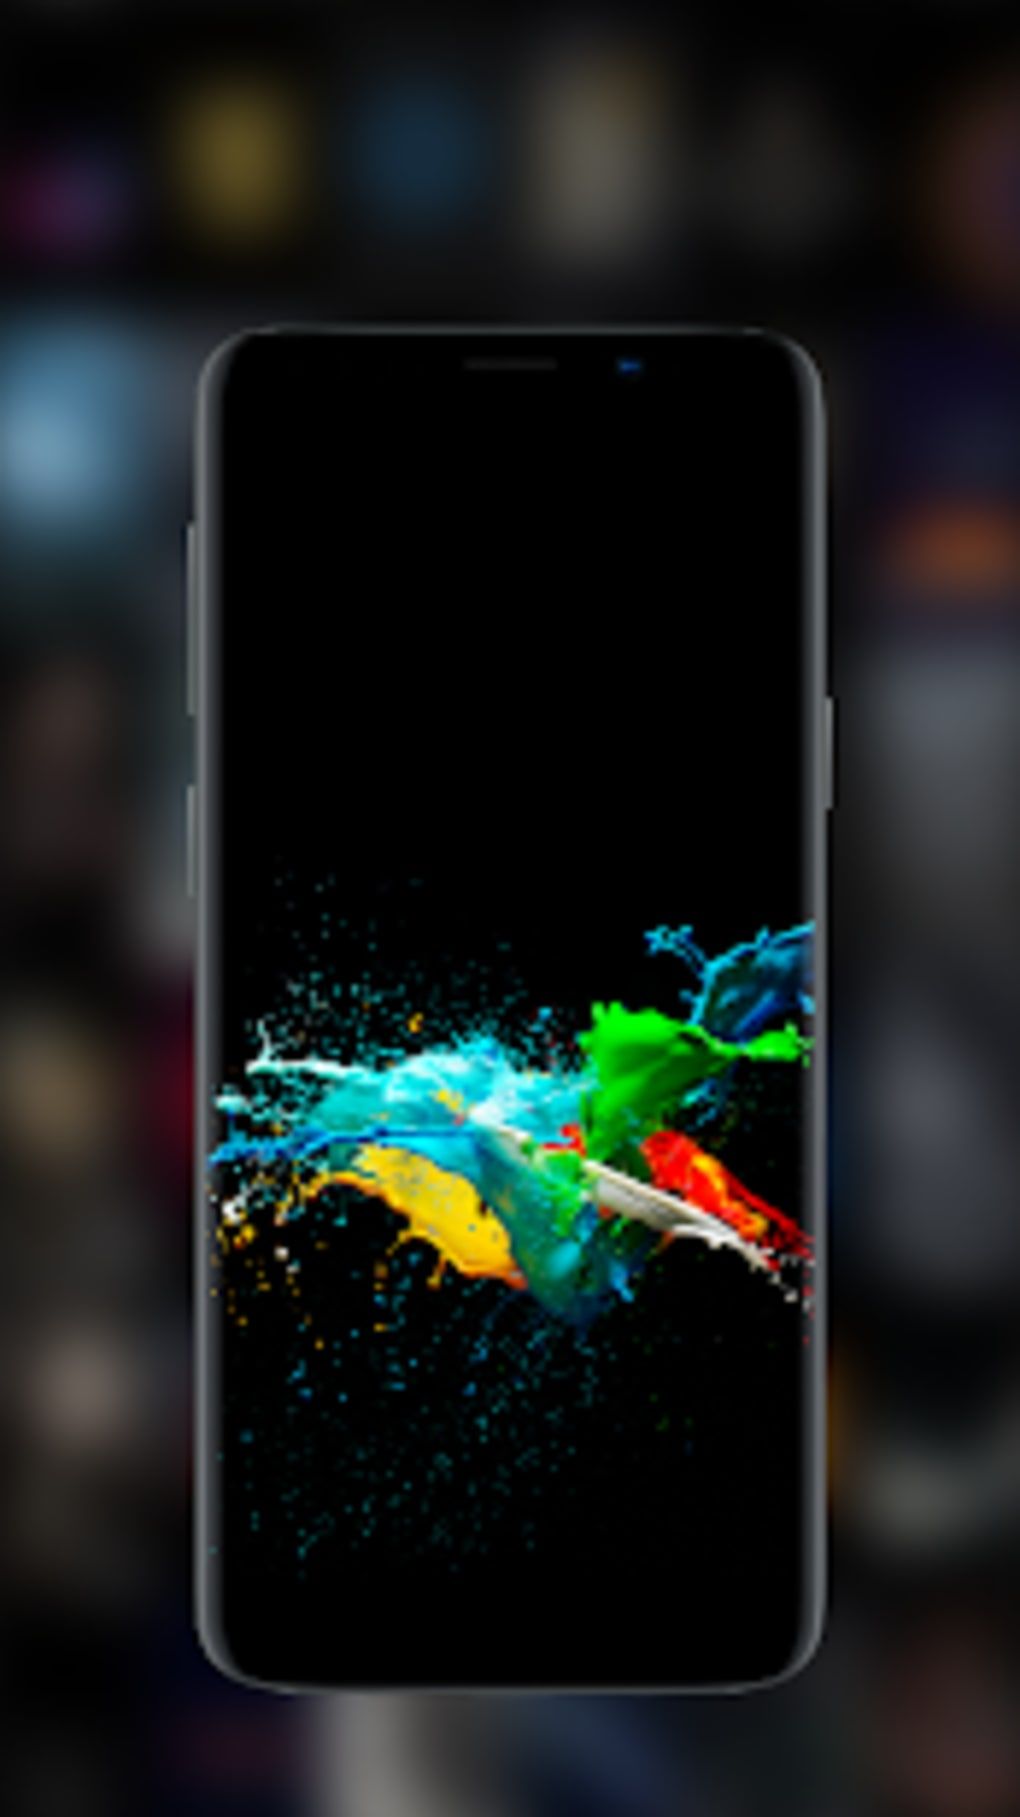 100+] Black Amoled Wallpapers | Wallpapers.com